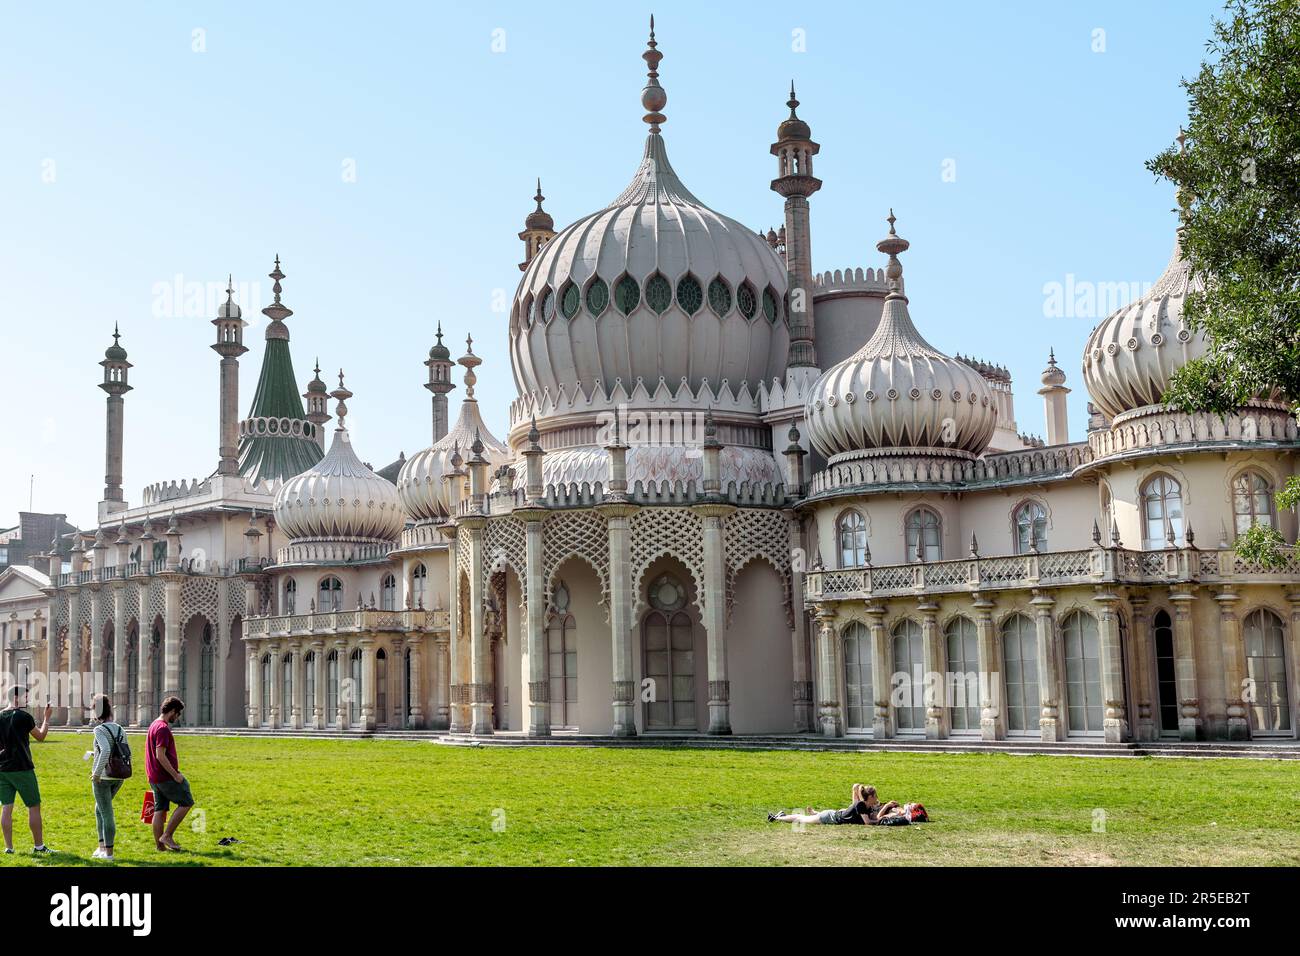 BRIGHTON, GREAT BRITAIN - SEPTEMBER 16, 2014: This is the lawn in front of the Royal Pavilion with people resting on the grass. Stock Photo